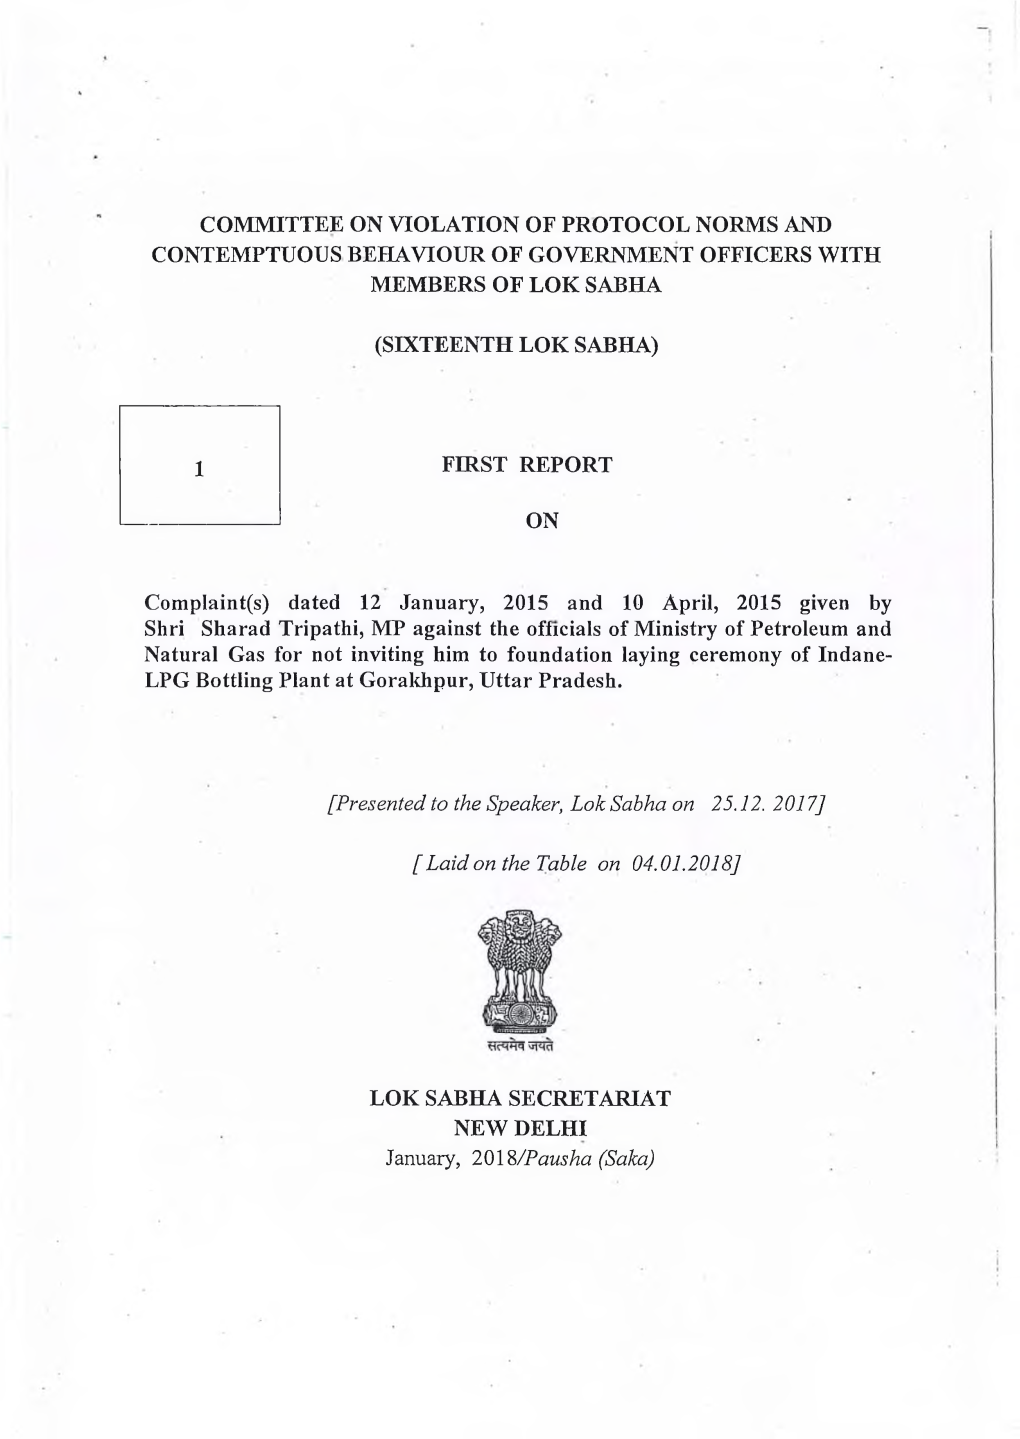 Committee on Violation of Protocol Norms and Contemptuous Behaviour of Government Officers with Members of Lok Sabha (Sixteenth